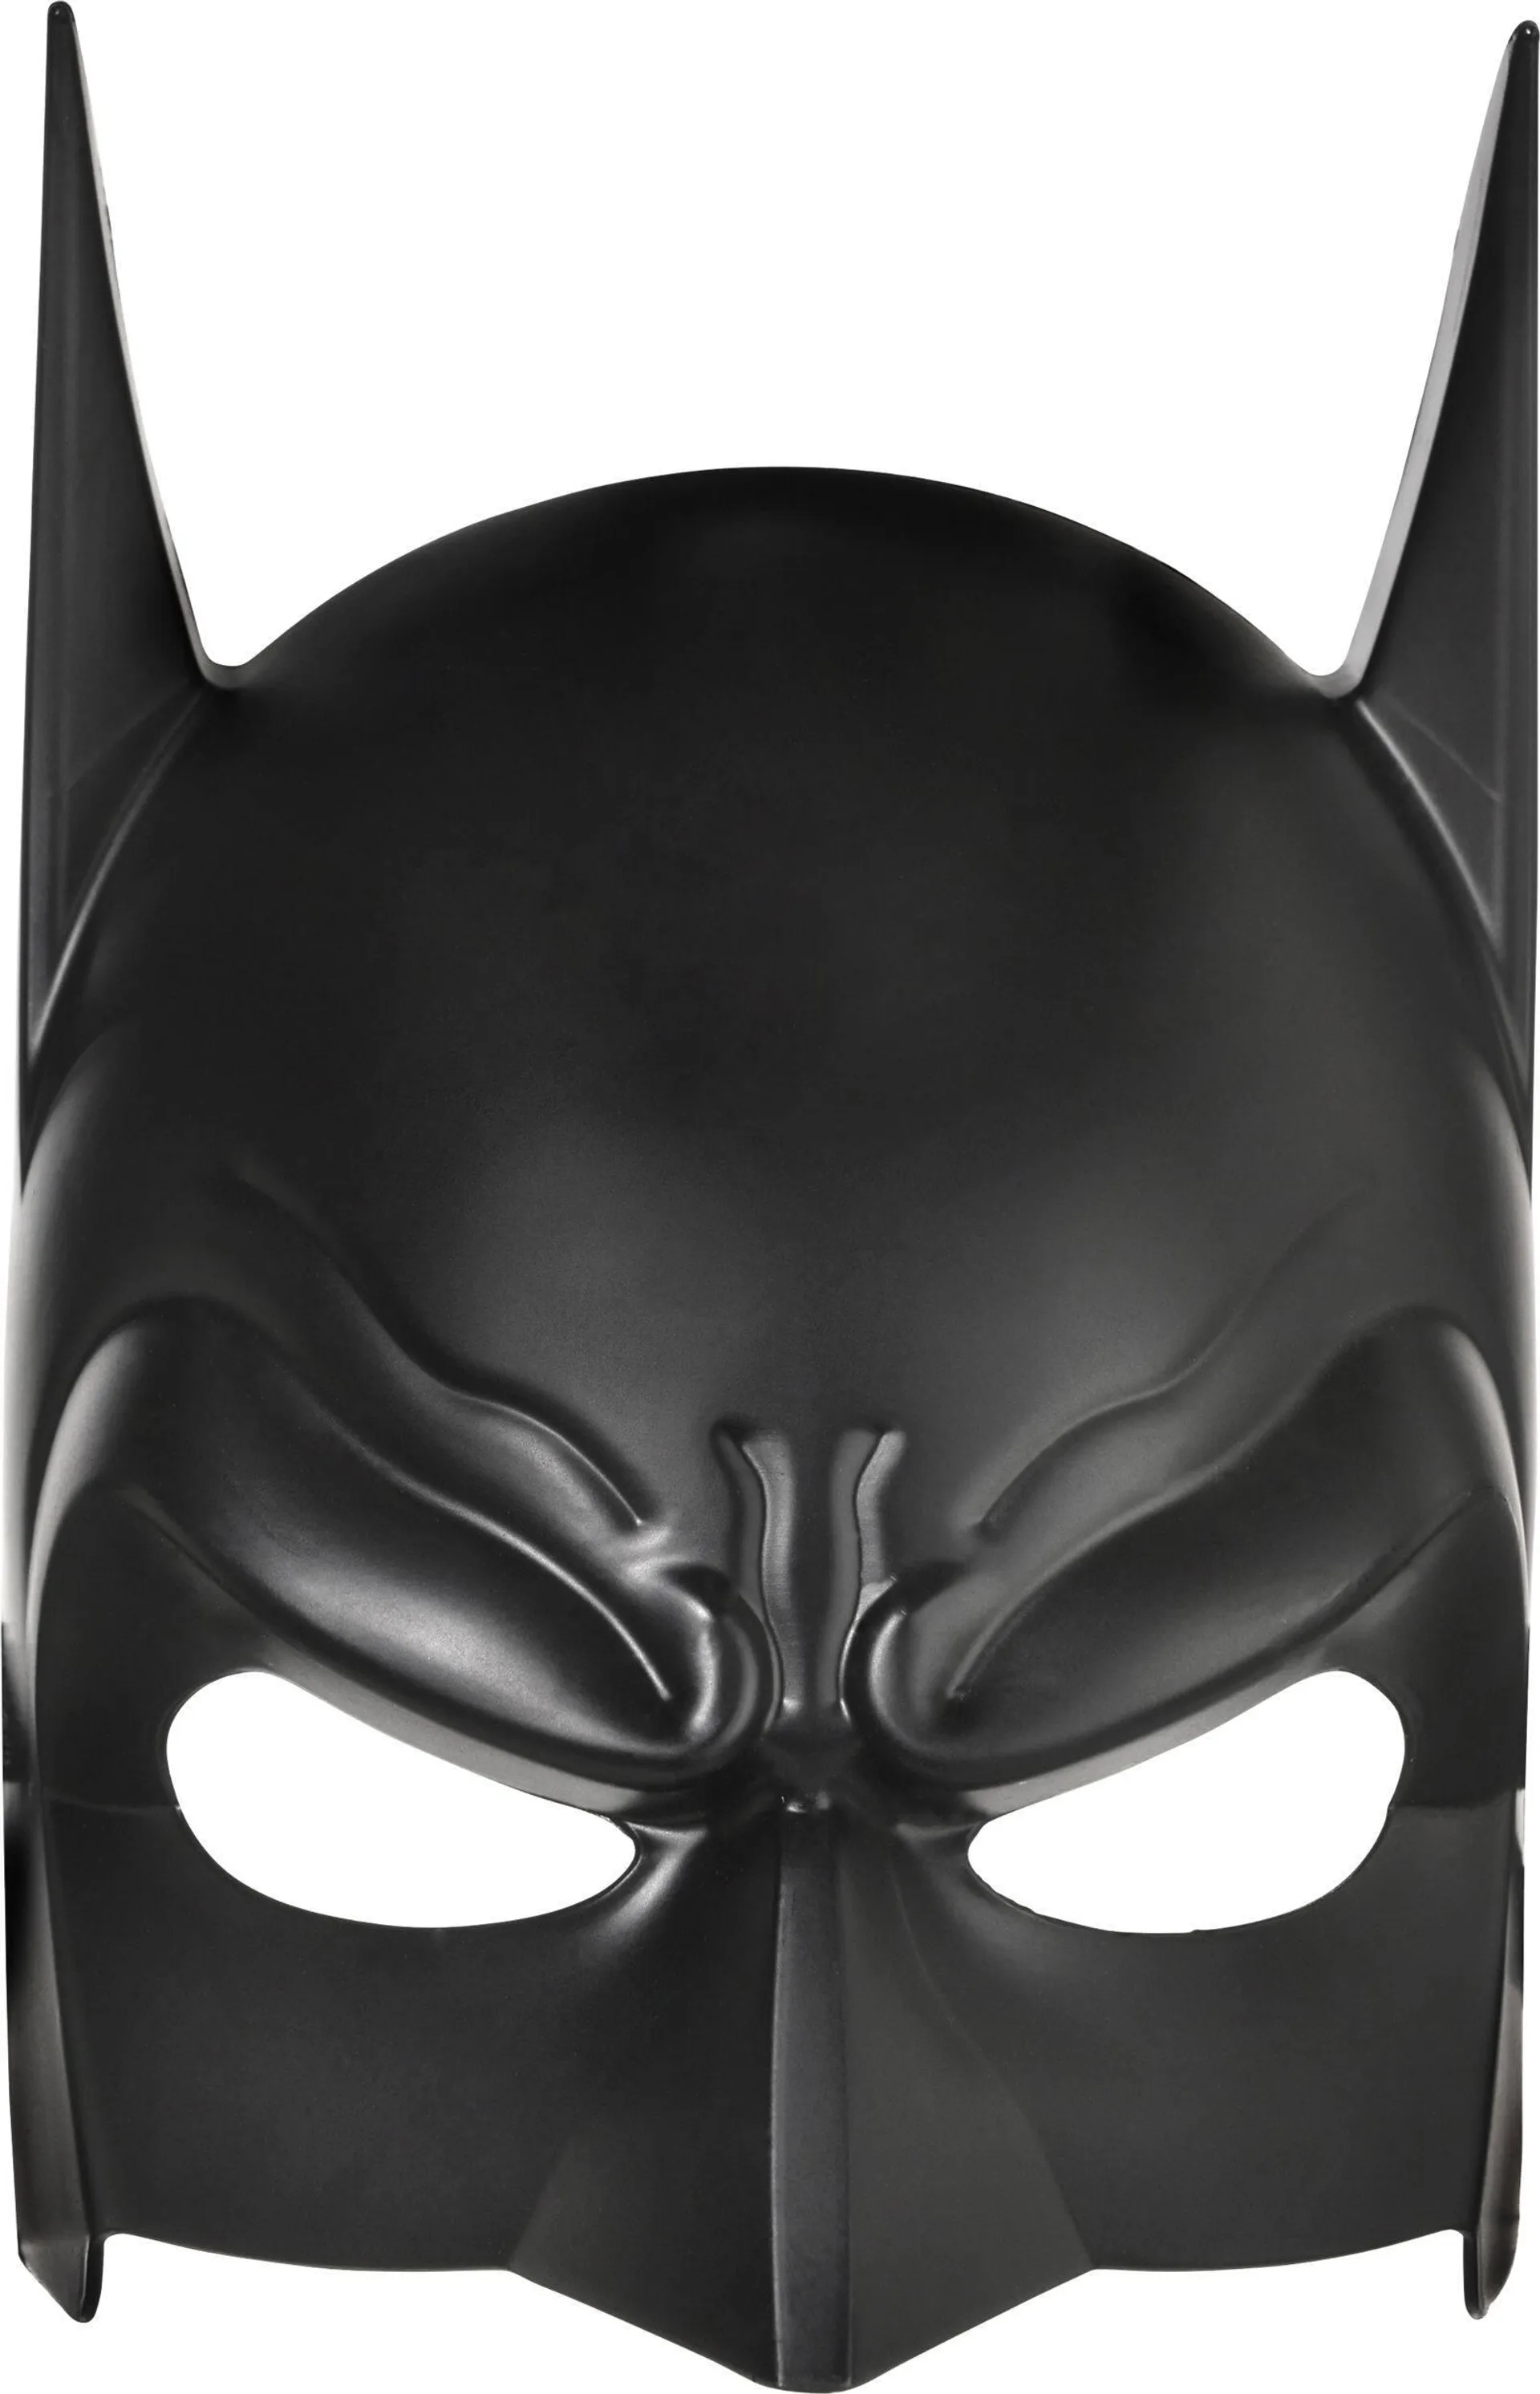 DC Batman Half Face Mask, Black, One Size, Wearable Costume Accessory for Halloween